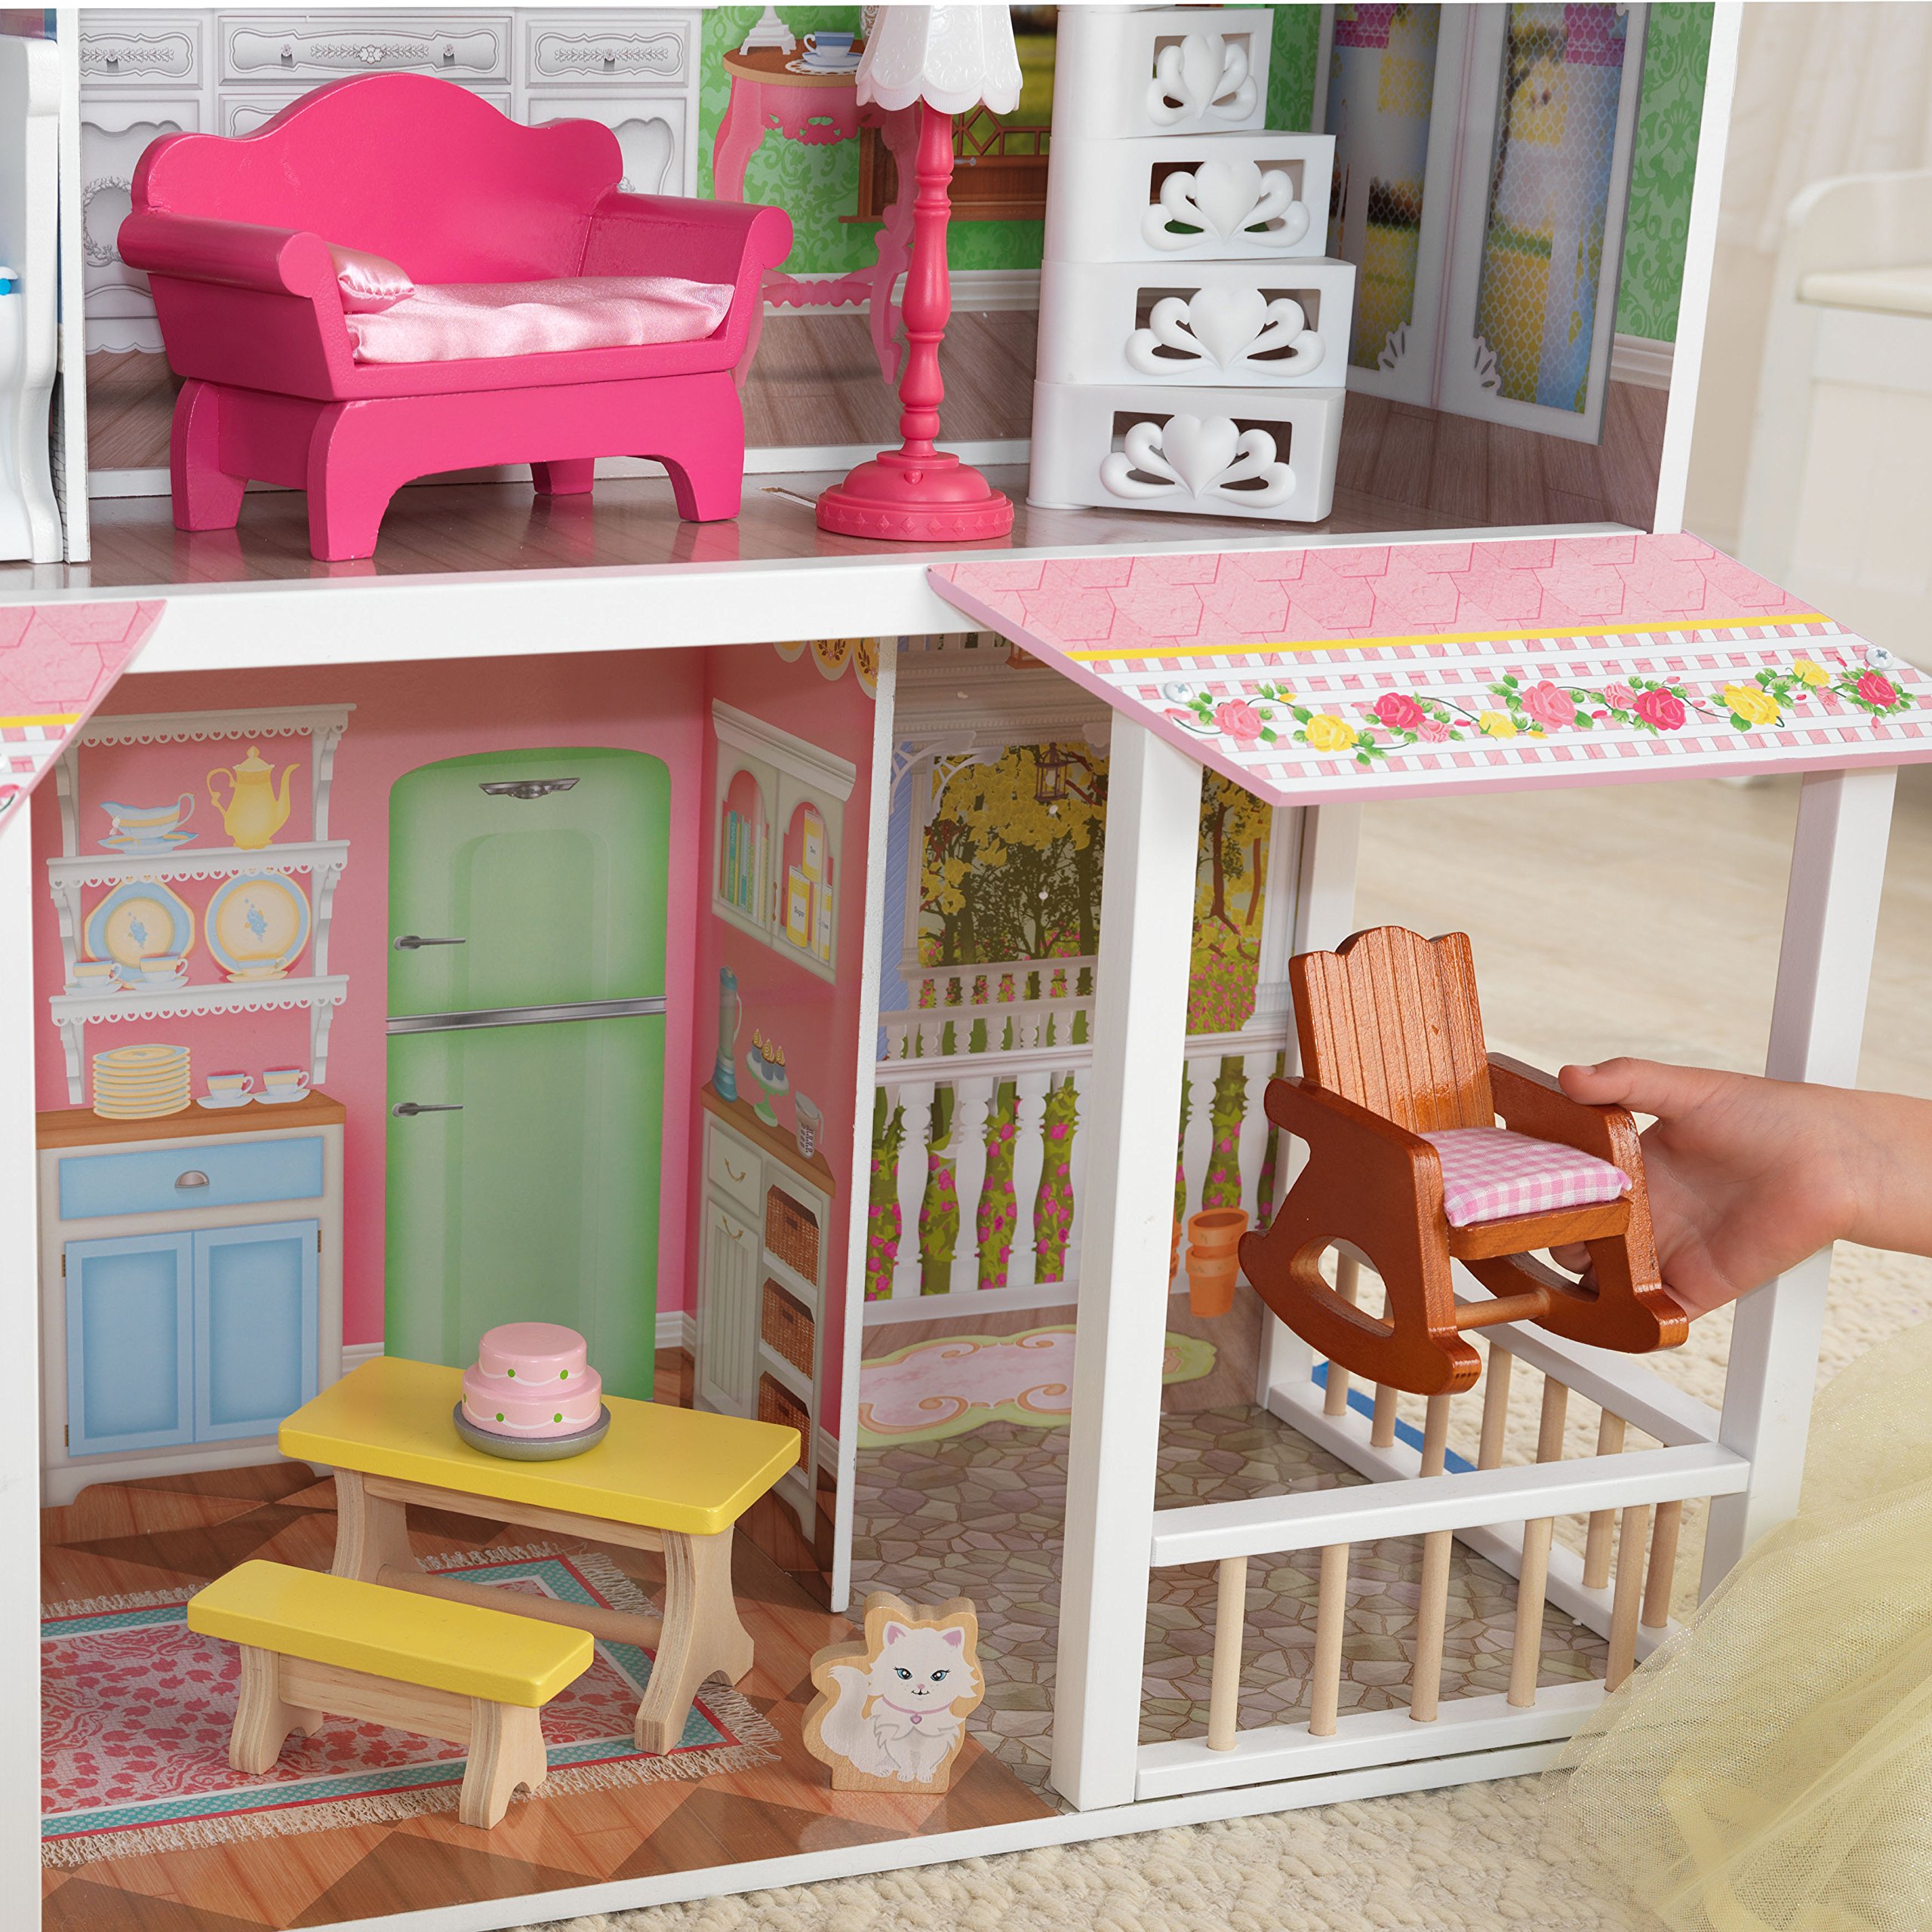 KidKraft Sweet Savannah Dollhouse with 14 Accessories Included, Gift for Ages 3+